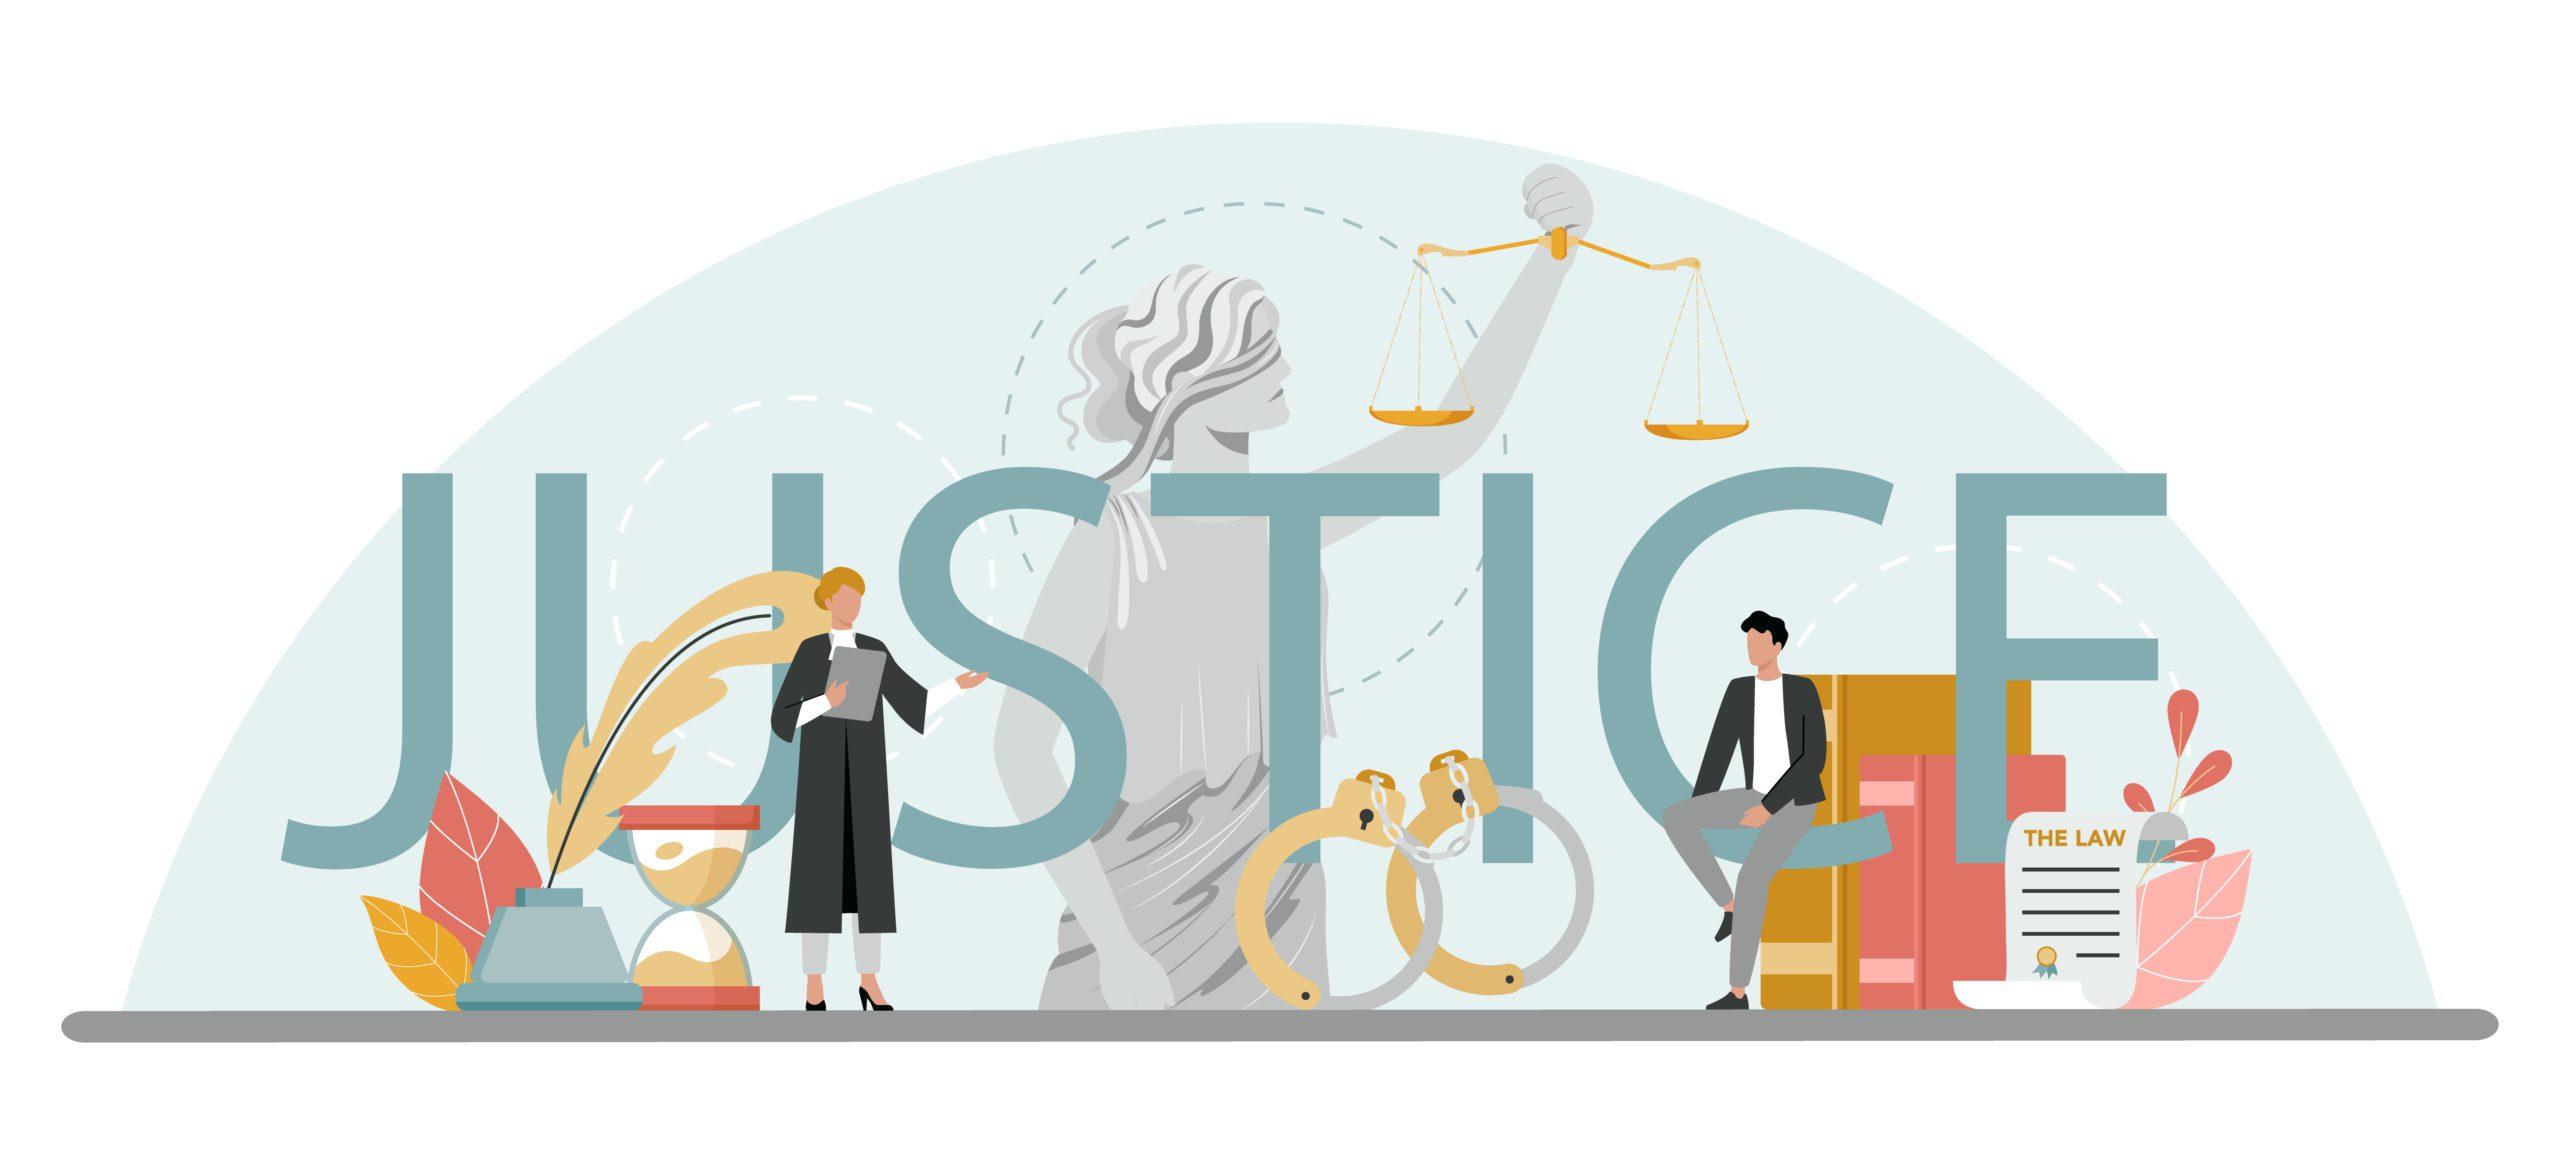 Justice typographic header. Court worker stand for justice and law. Judge in traditional black robe hearing a case and sentencing. Judgement and punishment idea. Isolated flat vector illustration